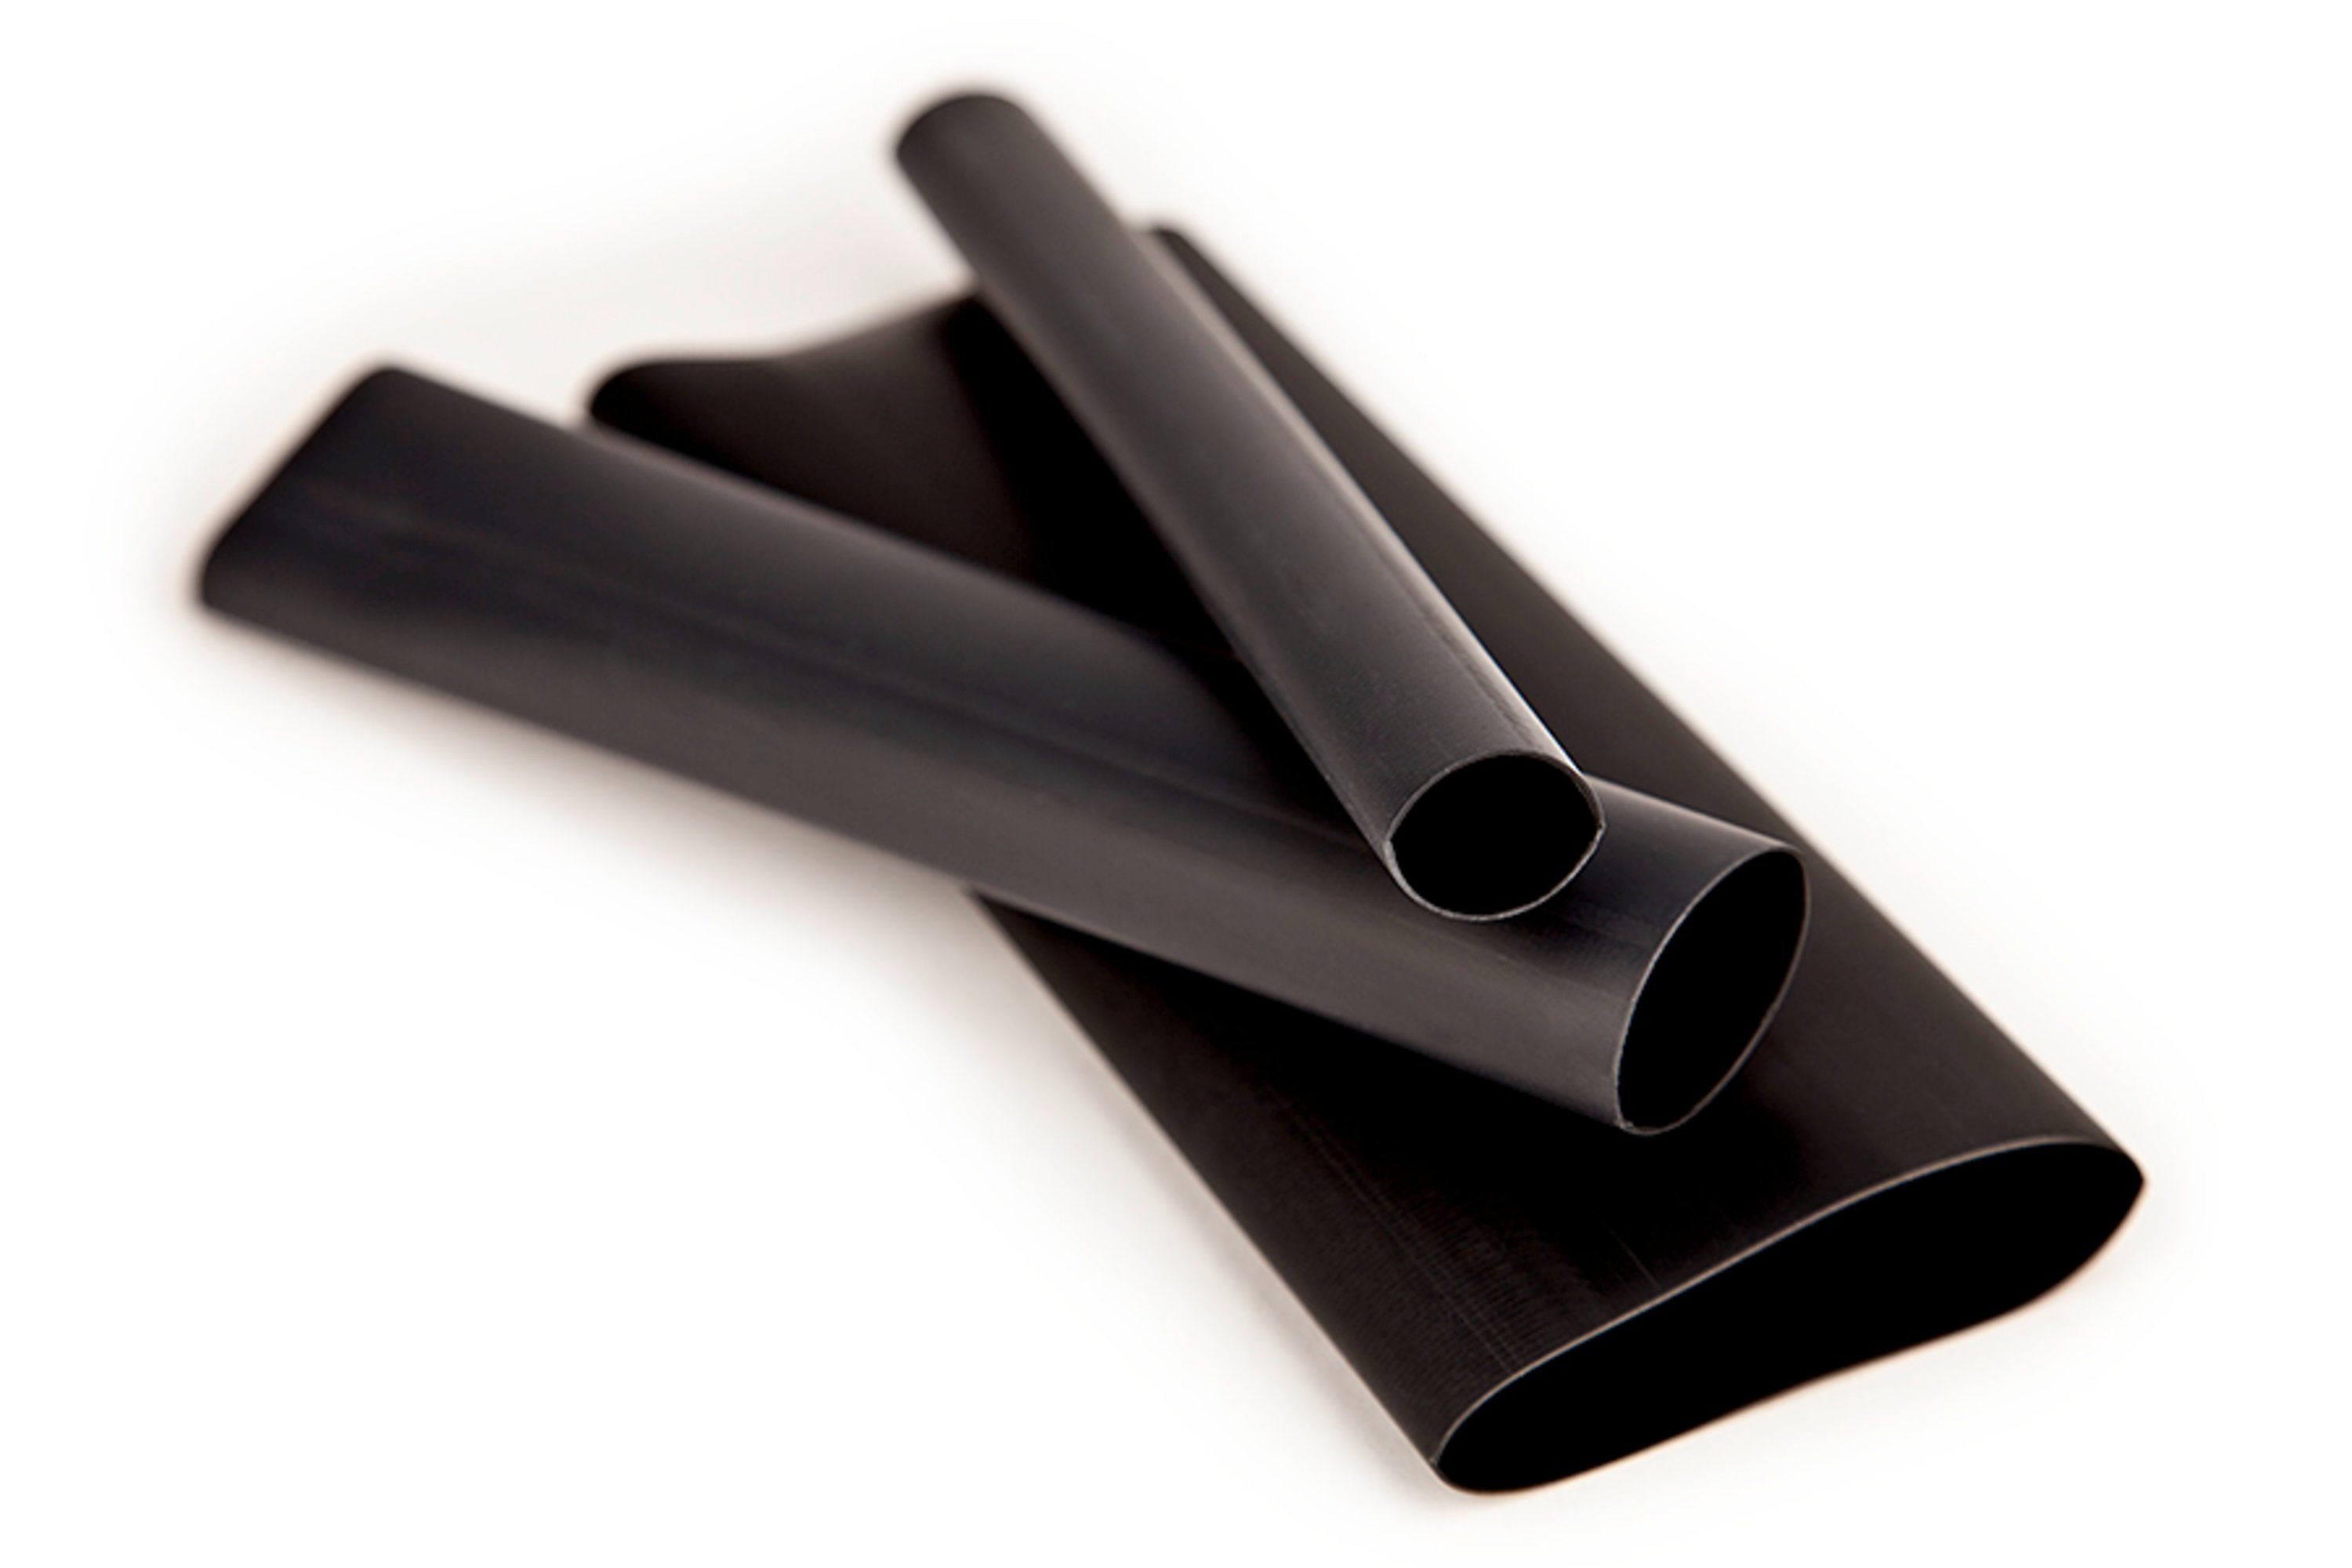 3M™ EPS 200 Heat Shrink Tubing is a dual wall tubing that provides the advantage of integral, adhesive lined construction. This flame retardant tubing with a 2:1 shrink ratio, offers insulation for 600V rated applications. The flexible polyolefin construction with an internal layer of thermoplastic adhesive offers moisture seal protection in automotive and marine applications.